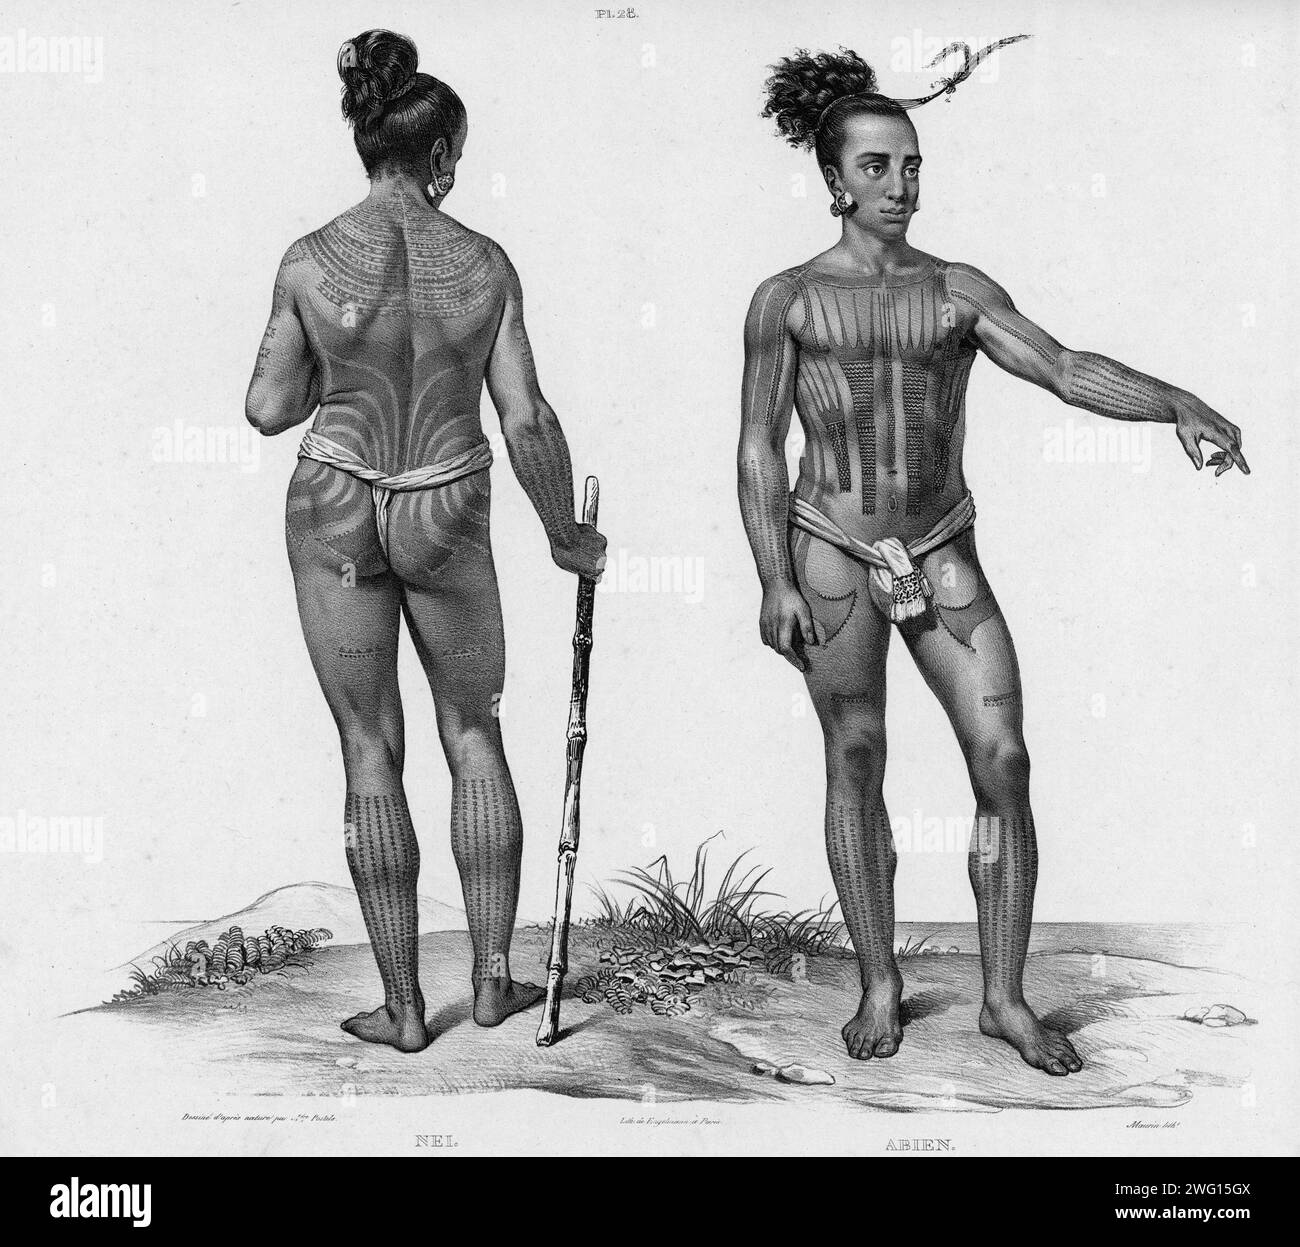 Inhabitants of the lower Caroline Islands, 19th century. One of 65 lithographs that were included in the volume of maps published after the round-the-world voyage of the corvette Seniavin commissioned by Tsar Nicholas I and carried out in 1826-29 under the command of Captain Fedor Litke (the Russian version of the name of Count Friedrich Lu&#xa8;tke, a Baltic German). The expedition began in Kronstadt (the main imperial Russian naval base near Saint Petersburg where Russian circumnavigations typically began and ended); it then traveled around Cape Horn to the Pacific Ocean. This voyage was one Stock Photo